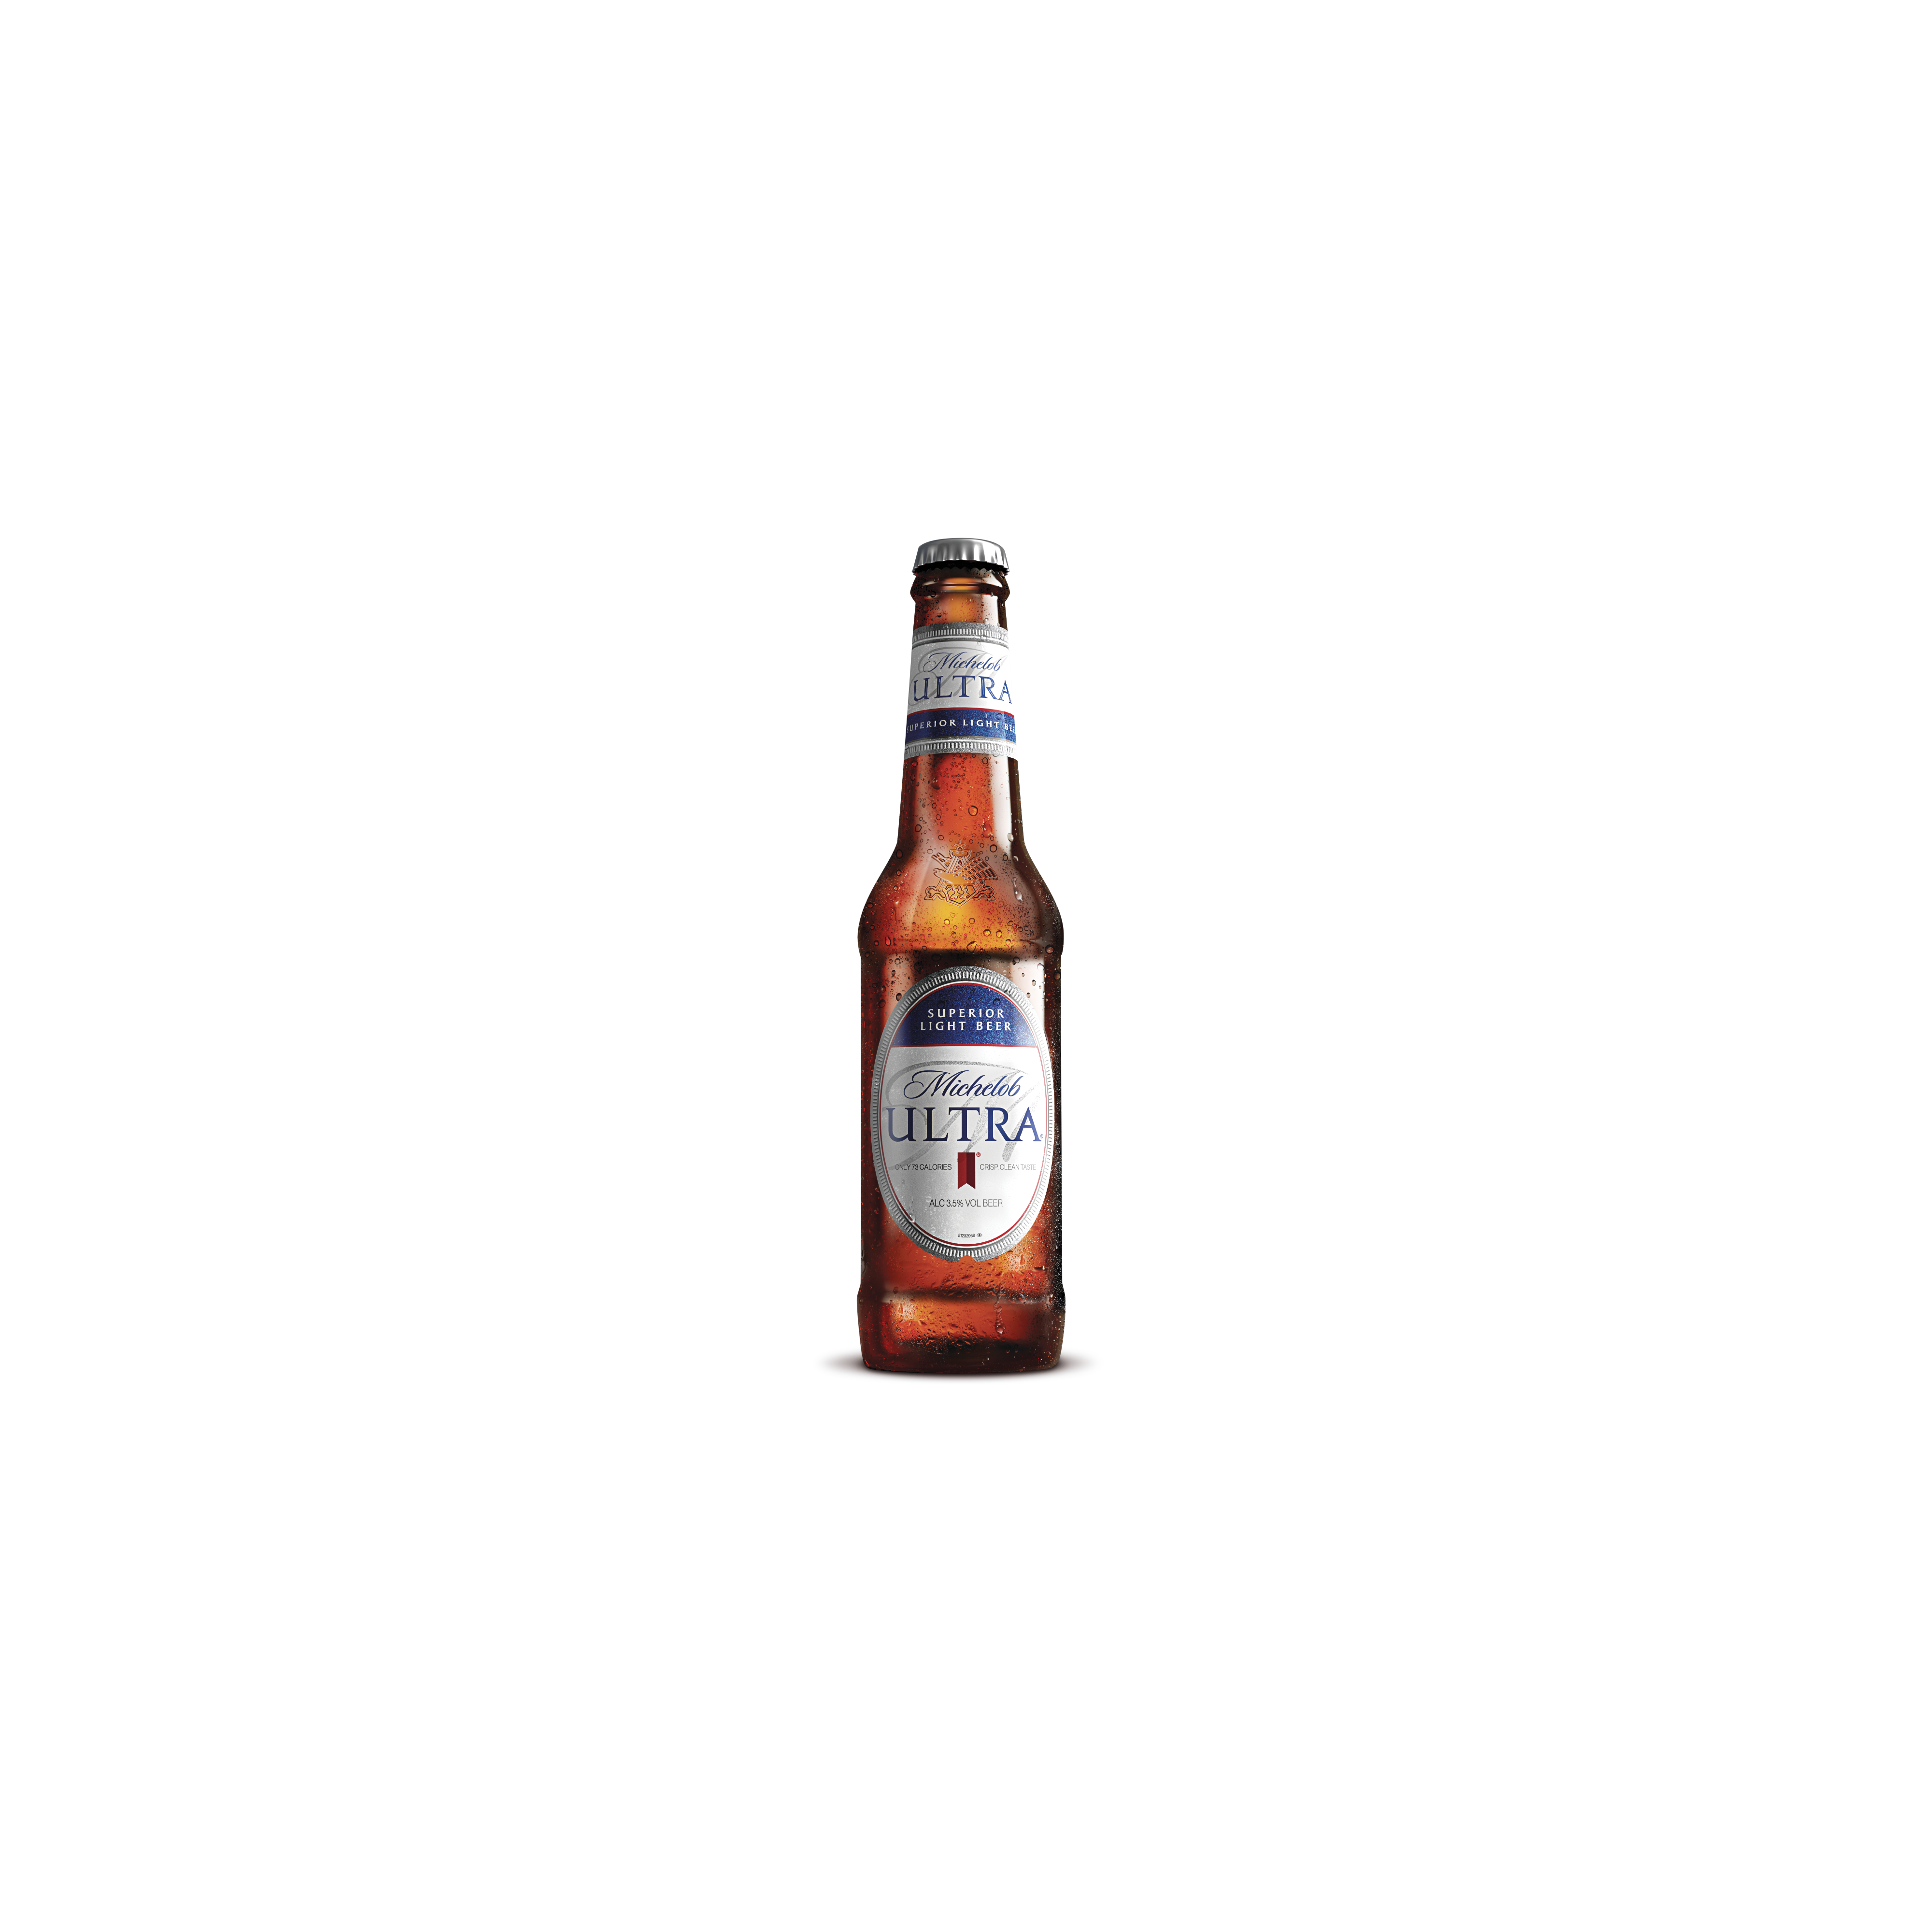 Michelob Ultra Launches New Bottle Format